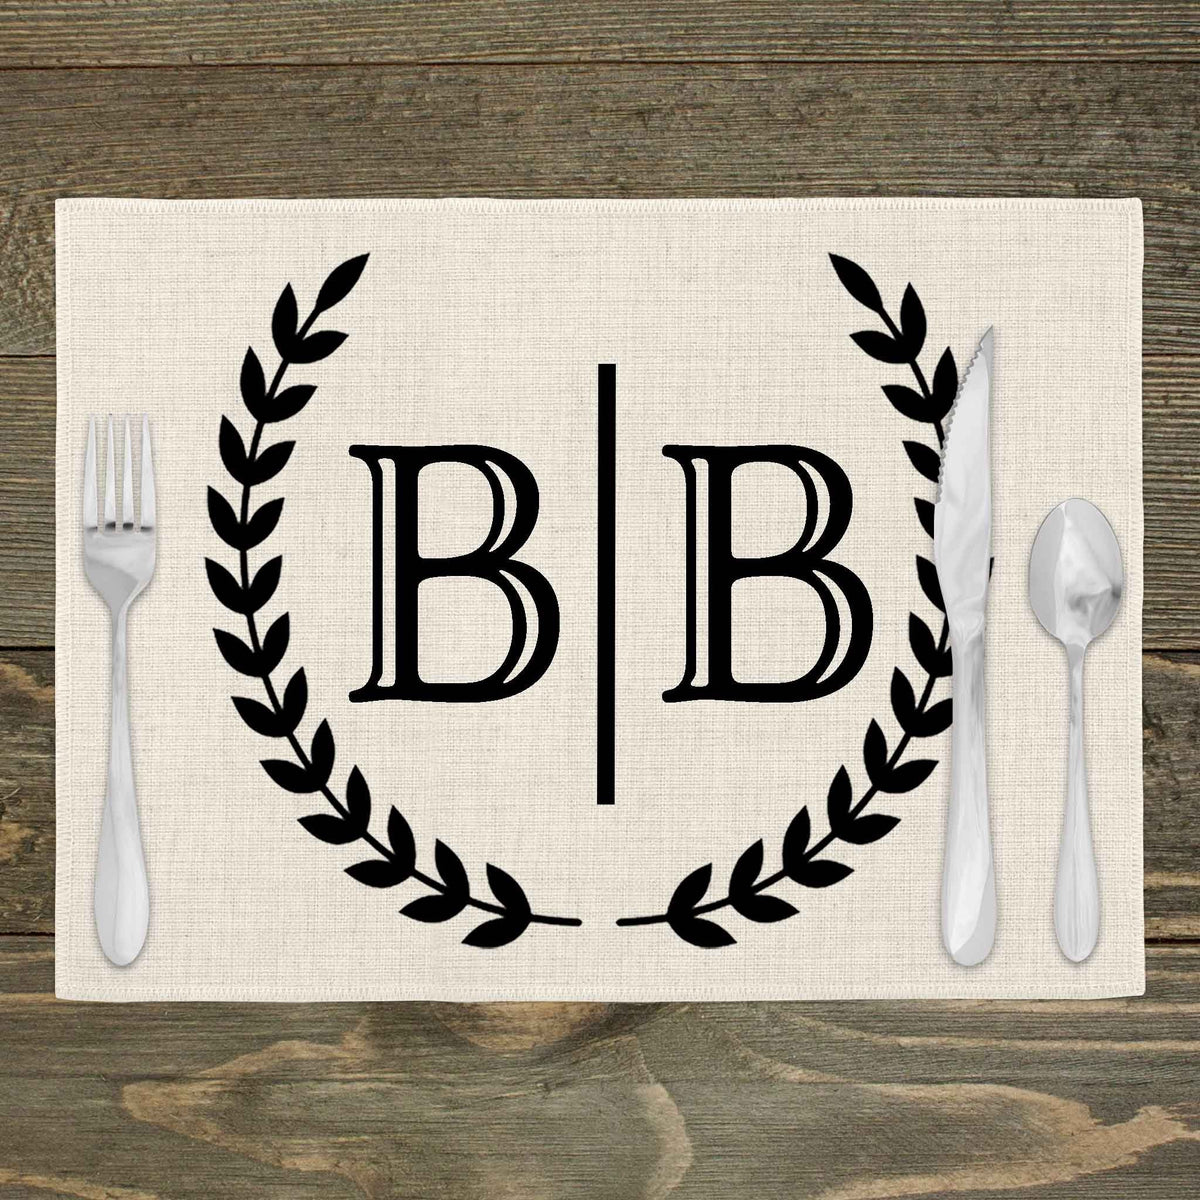 Custom Placemats | Personalized Dining and Serving | Laurel Wreath Side by Side